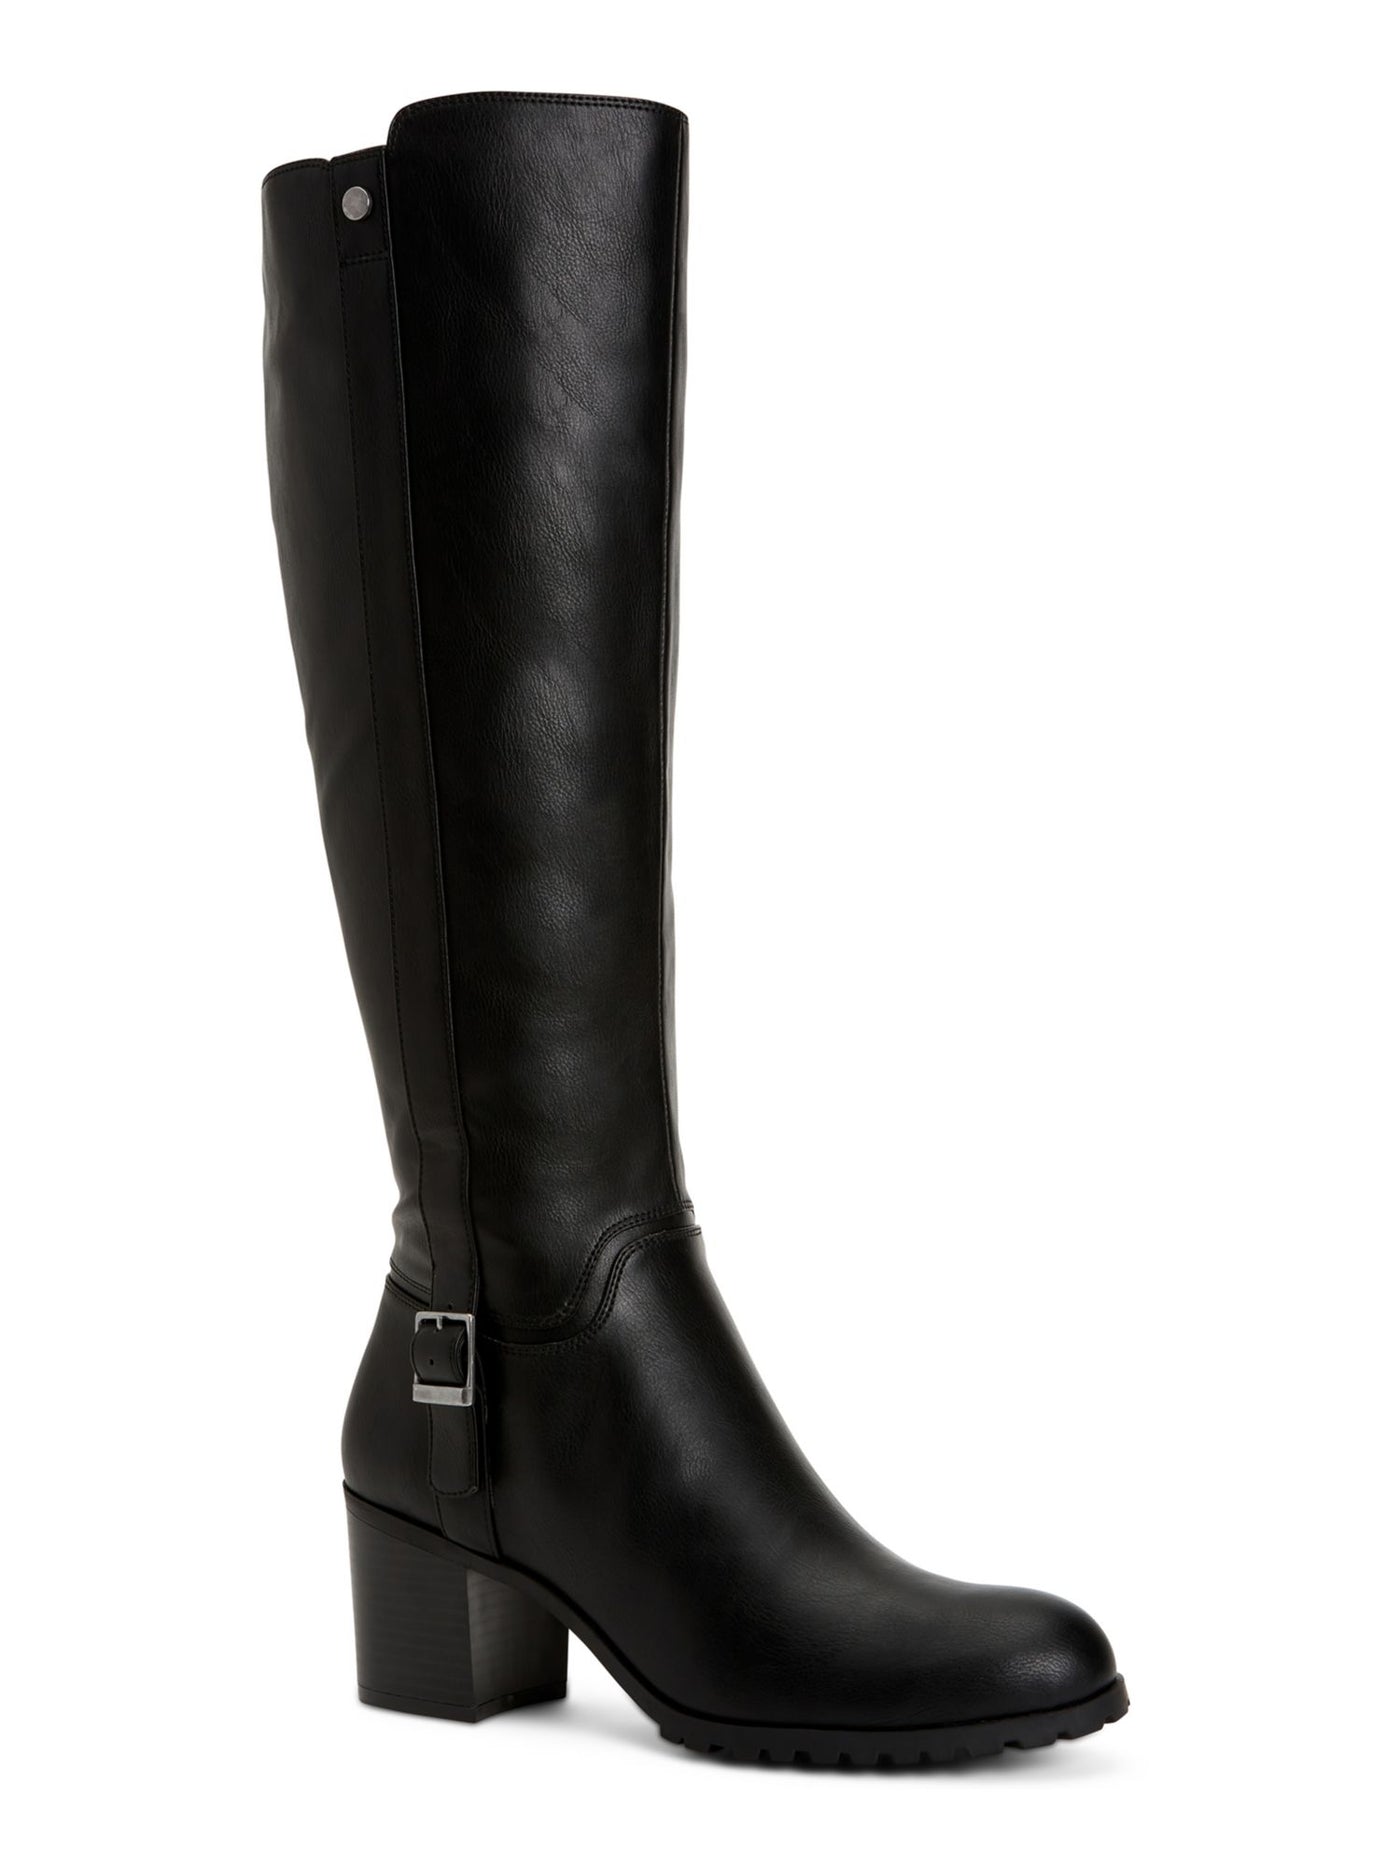 STYLE & COMPANY Womens Black Buckle Accent Round Toe Stacked Heel Zip-Up Dress Boots 7